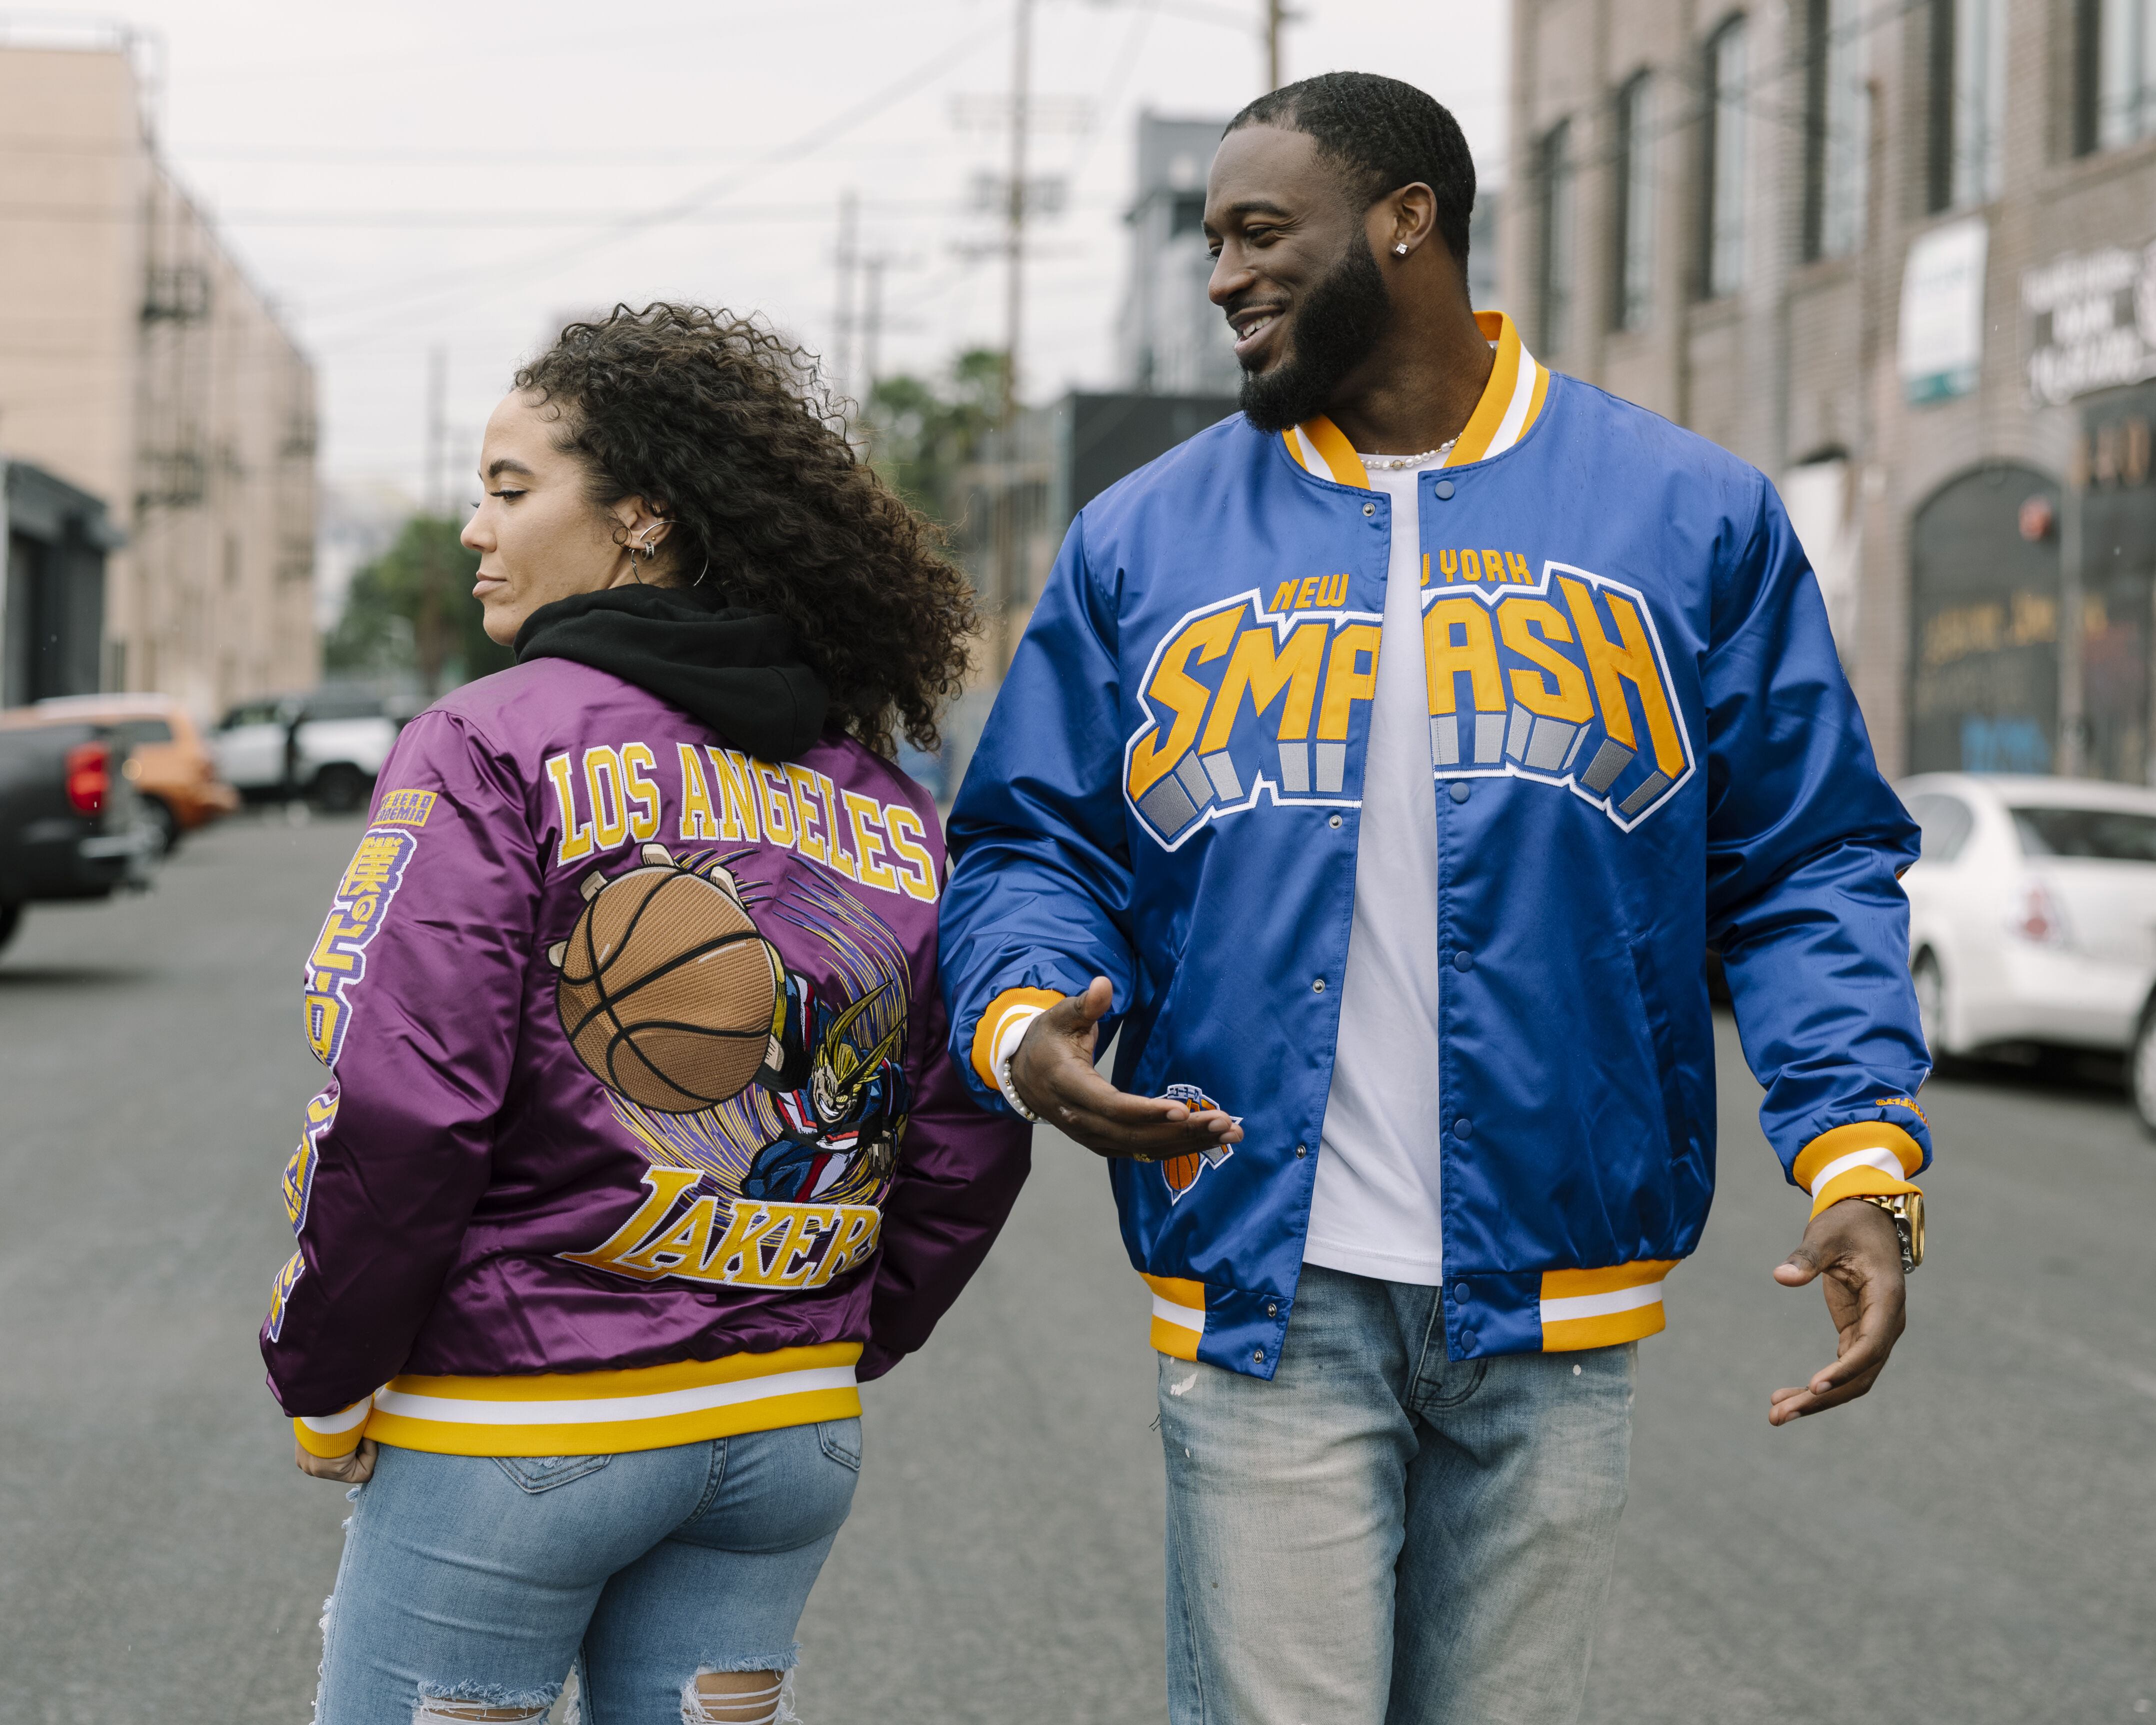  Los Angeles Lakers All Might Satin Jacket & New York Knicks All Might Satin Jacket